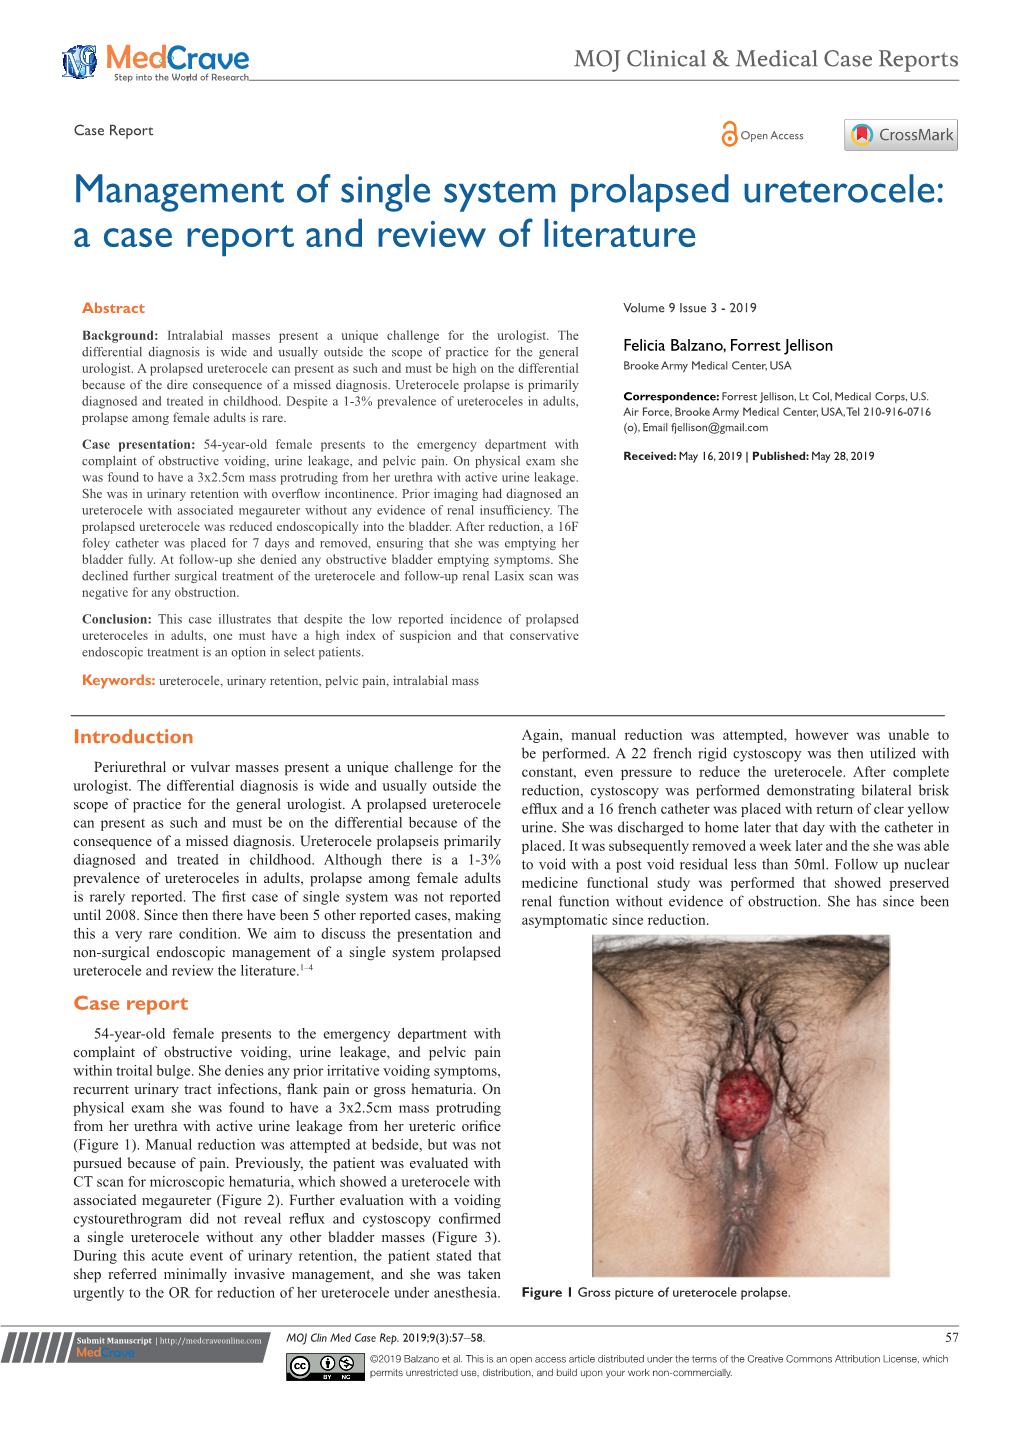 Management of Single System Prolapsed Ureterocele: a Case Report and Review of Literature